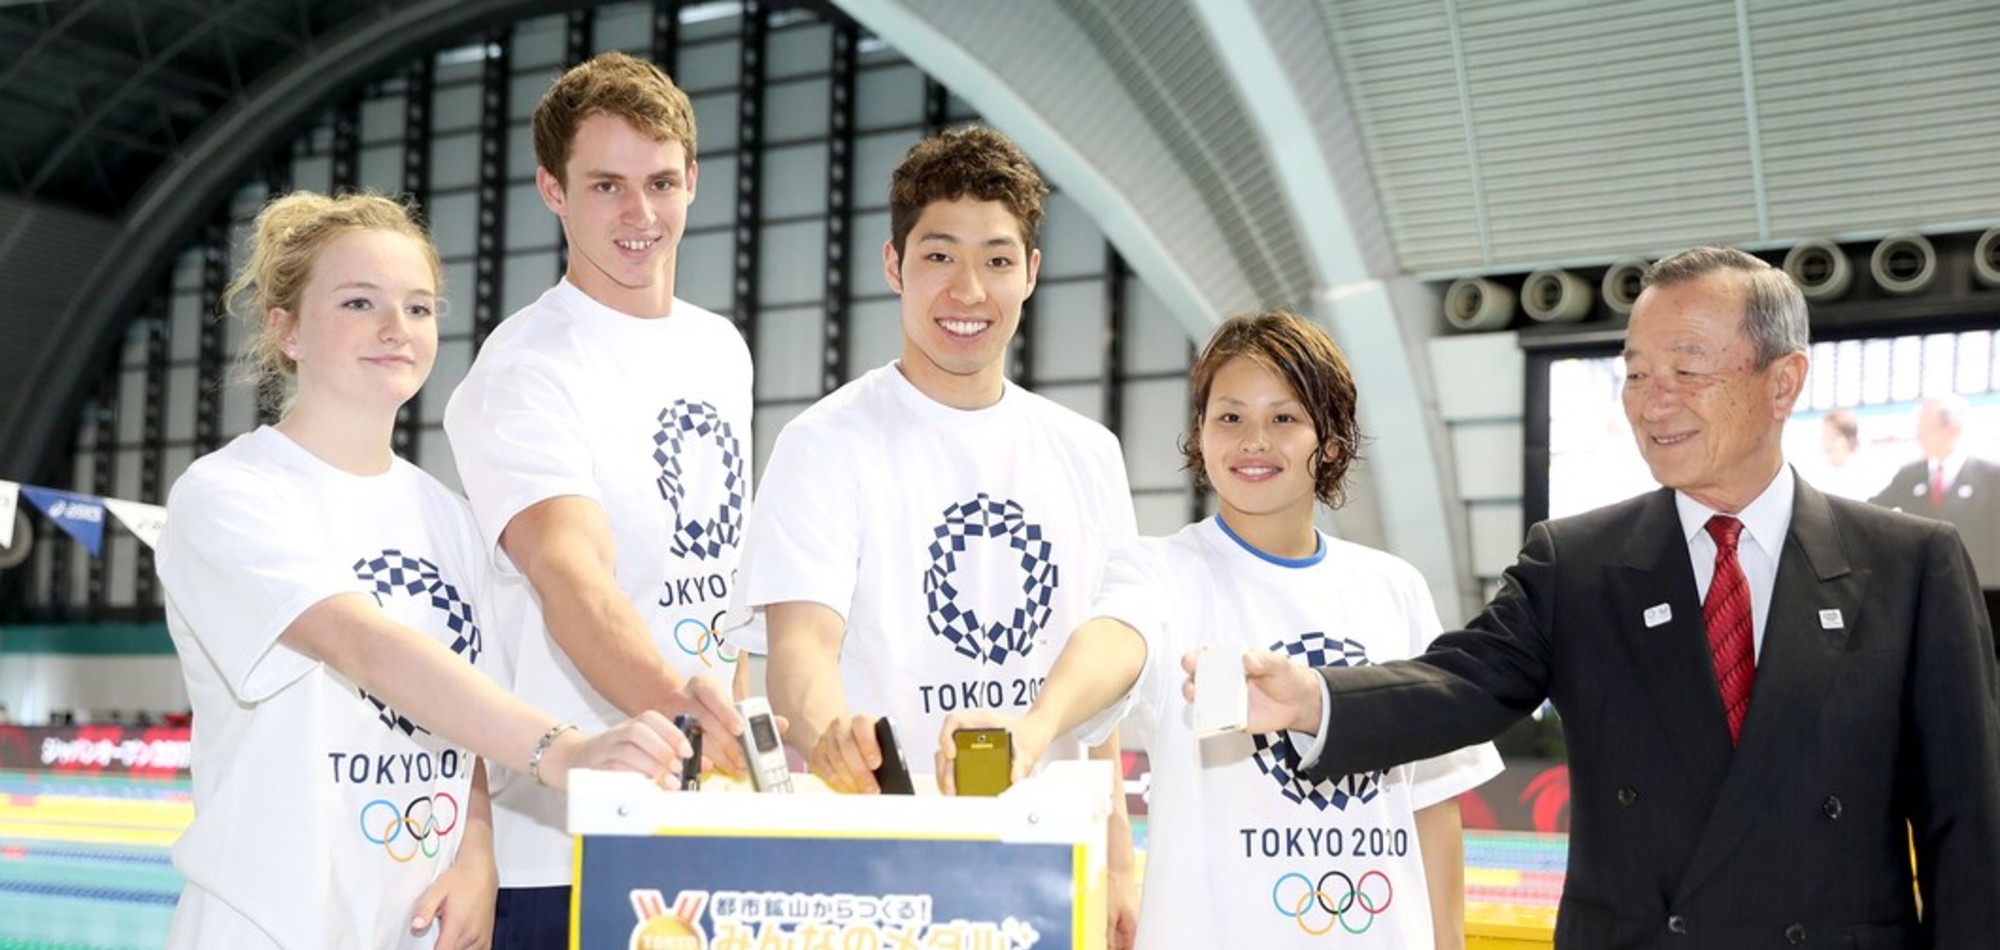 TOKYO 2020, 100 DAYS TO GO – FOR THE PLANET AND THE PEOPLE